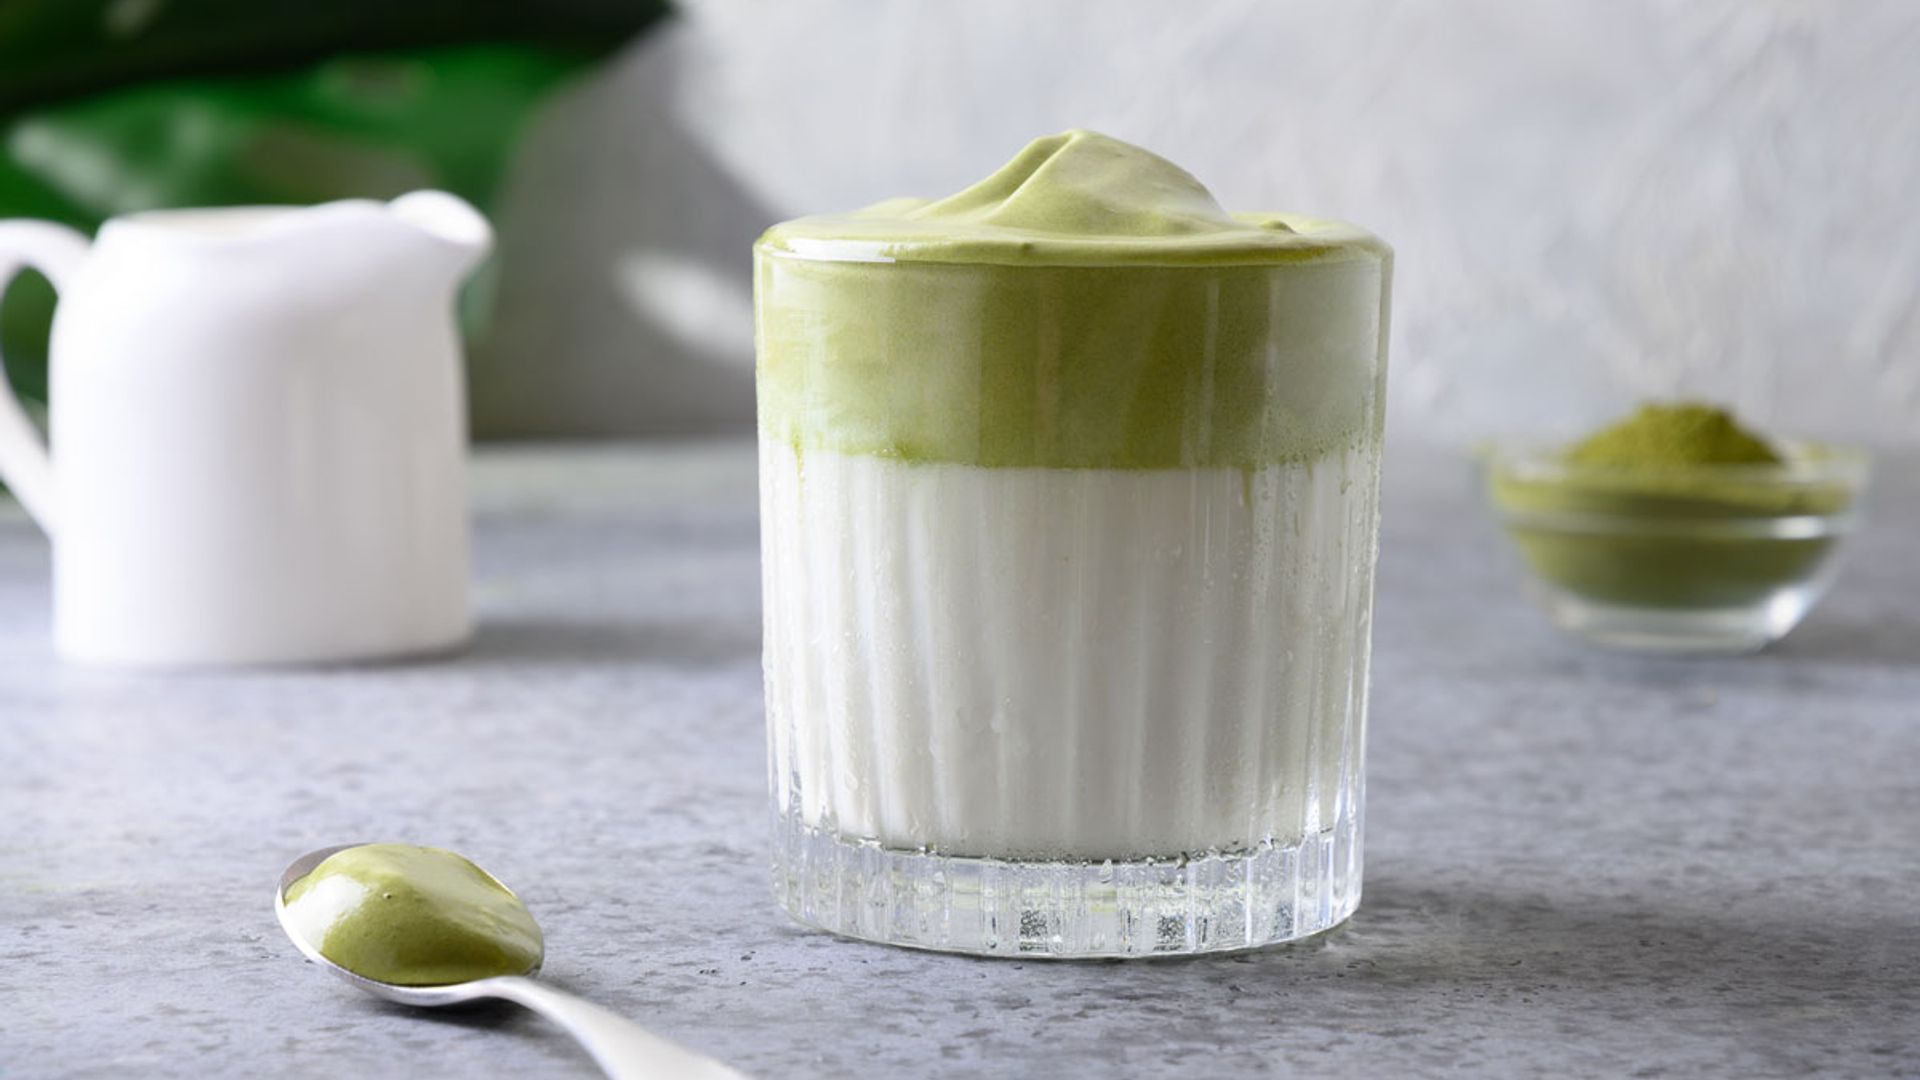 This TikTok matcha latte recipe has gone viral - and here’s how to make it